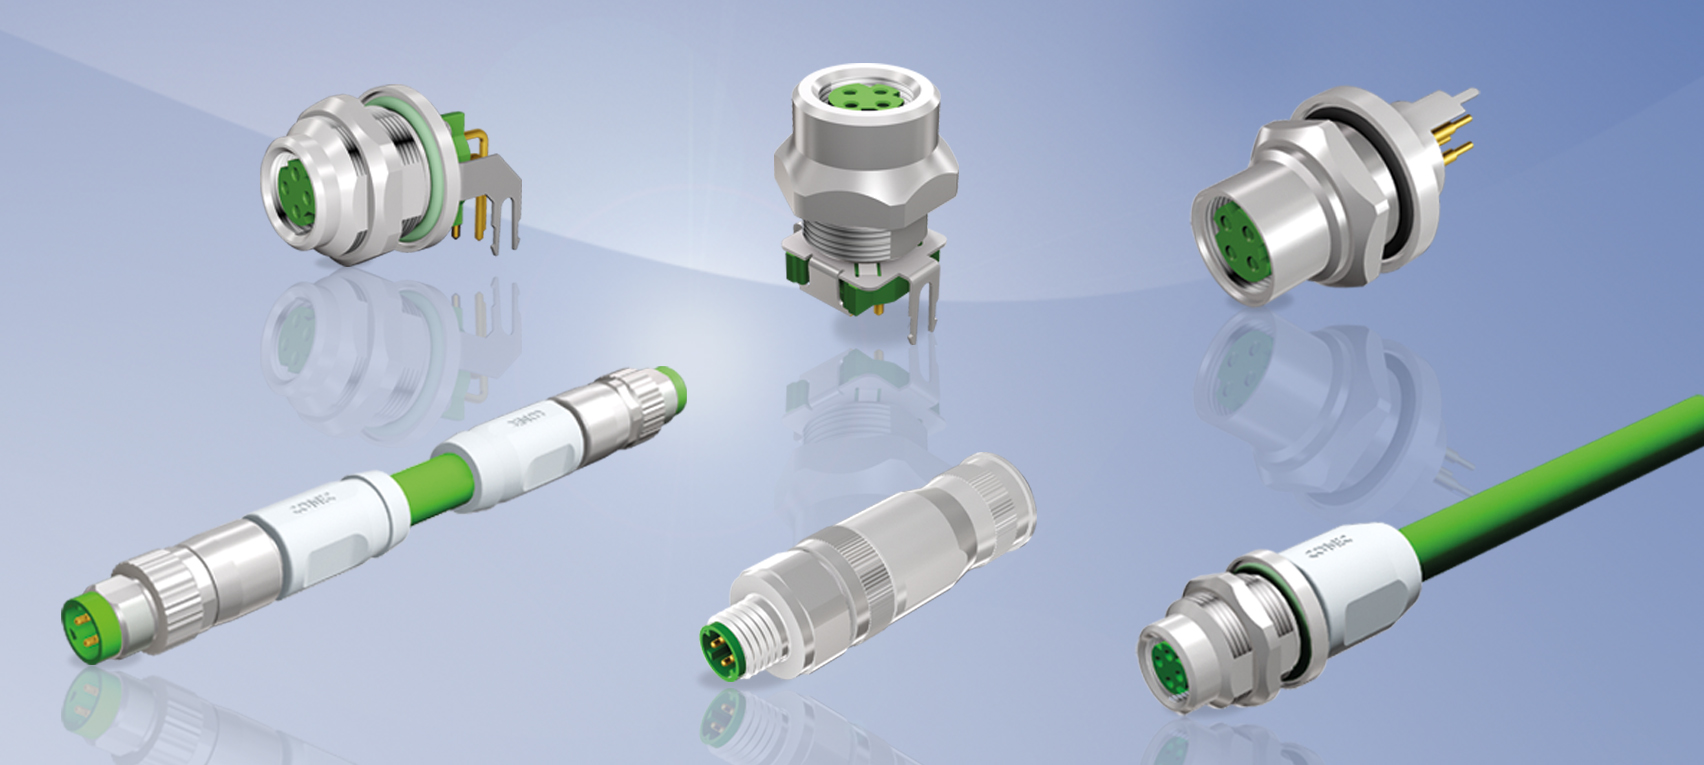 Industrial Ethernet connectors for transfer rates up to 100 Mbps